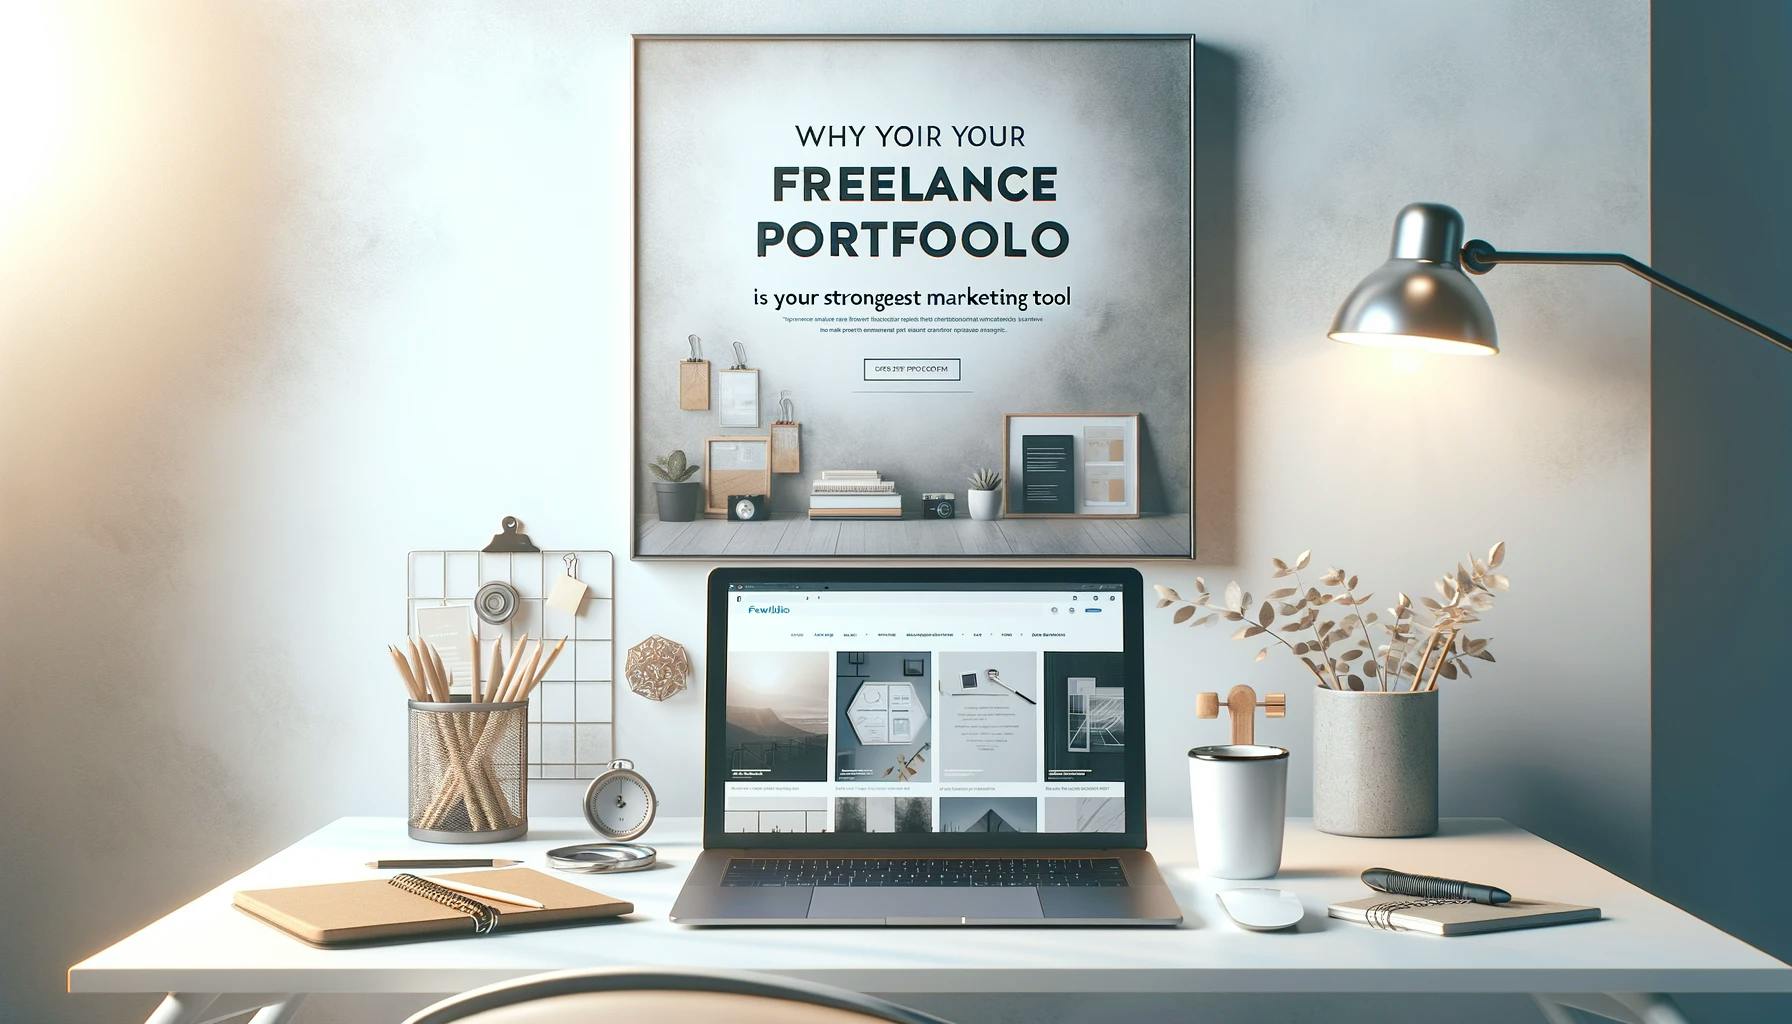 Why Your Freelance Portfolio is Your Strongest Marketing Tool - A Comprehensive Guide